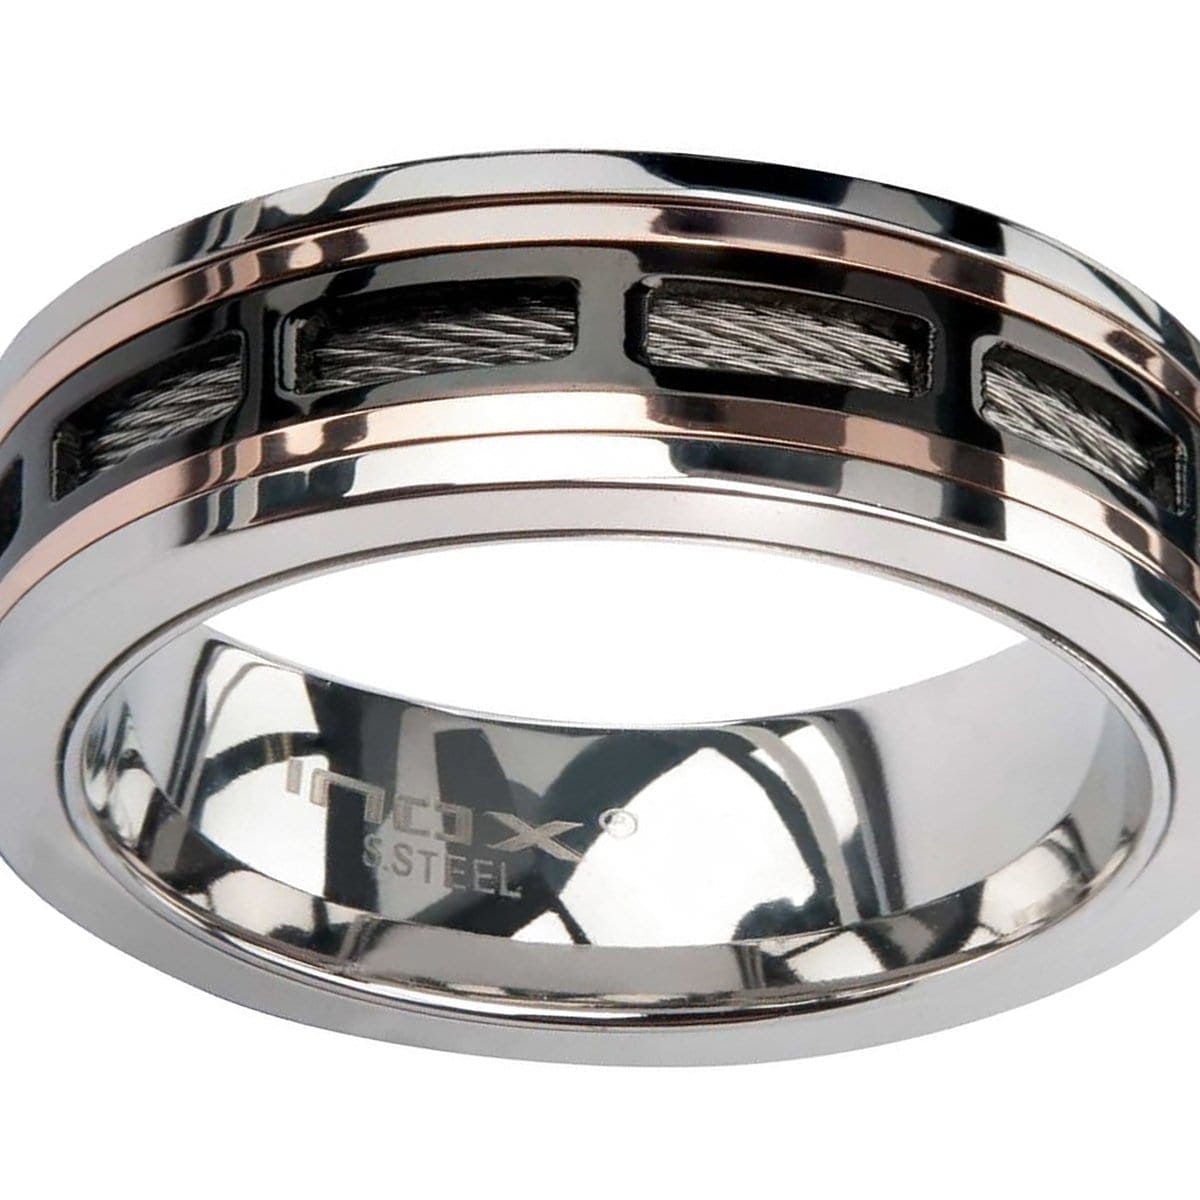 INOX JEWELRY Rings Rose Tone, Black and Silver Tone Stainless Steel Framed Cable Spinner Ring